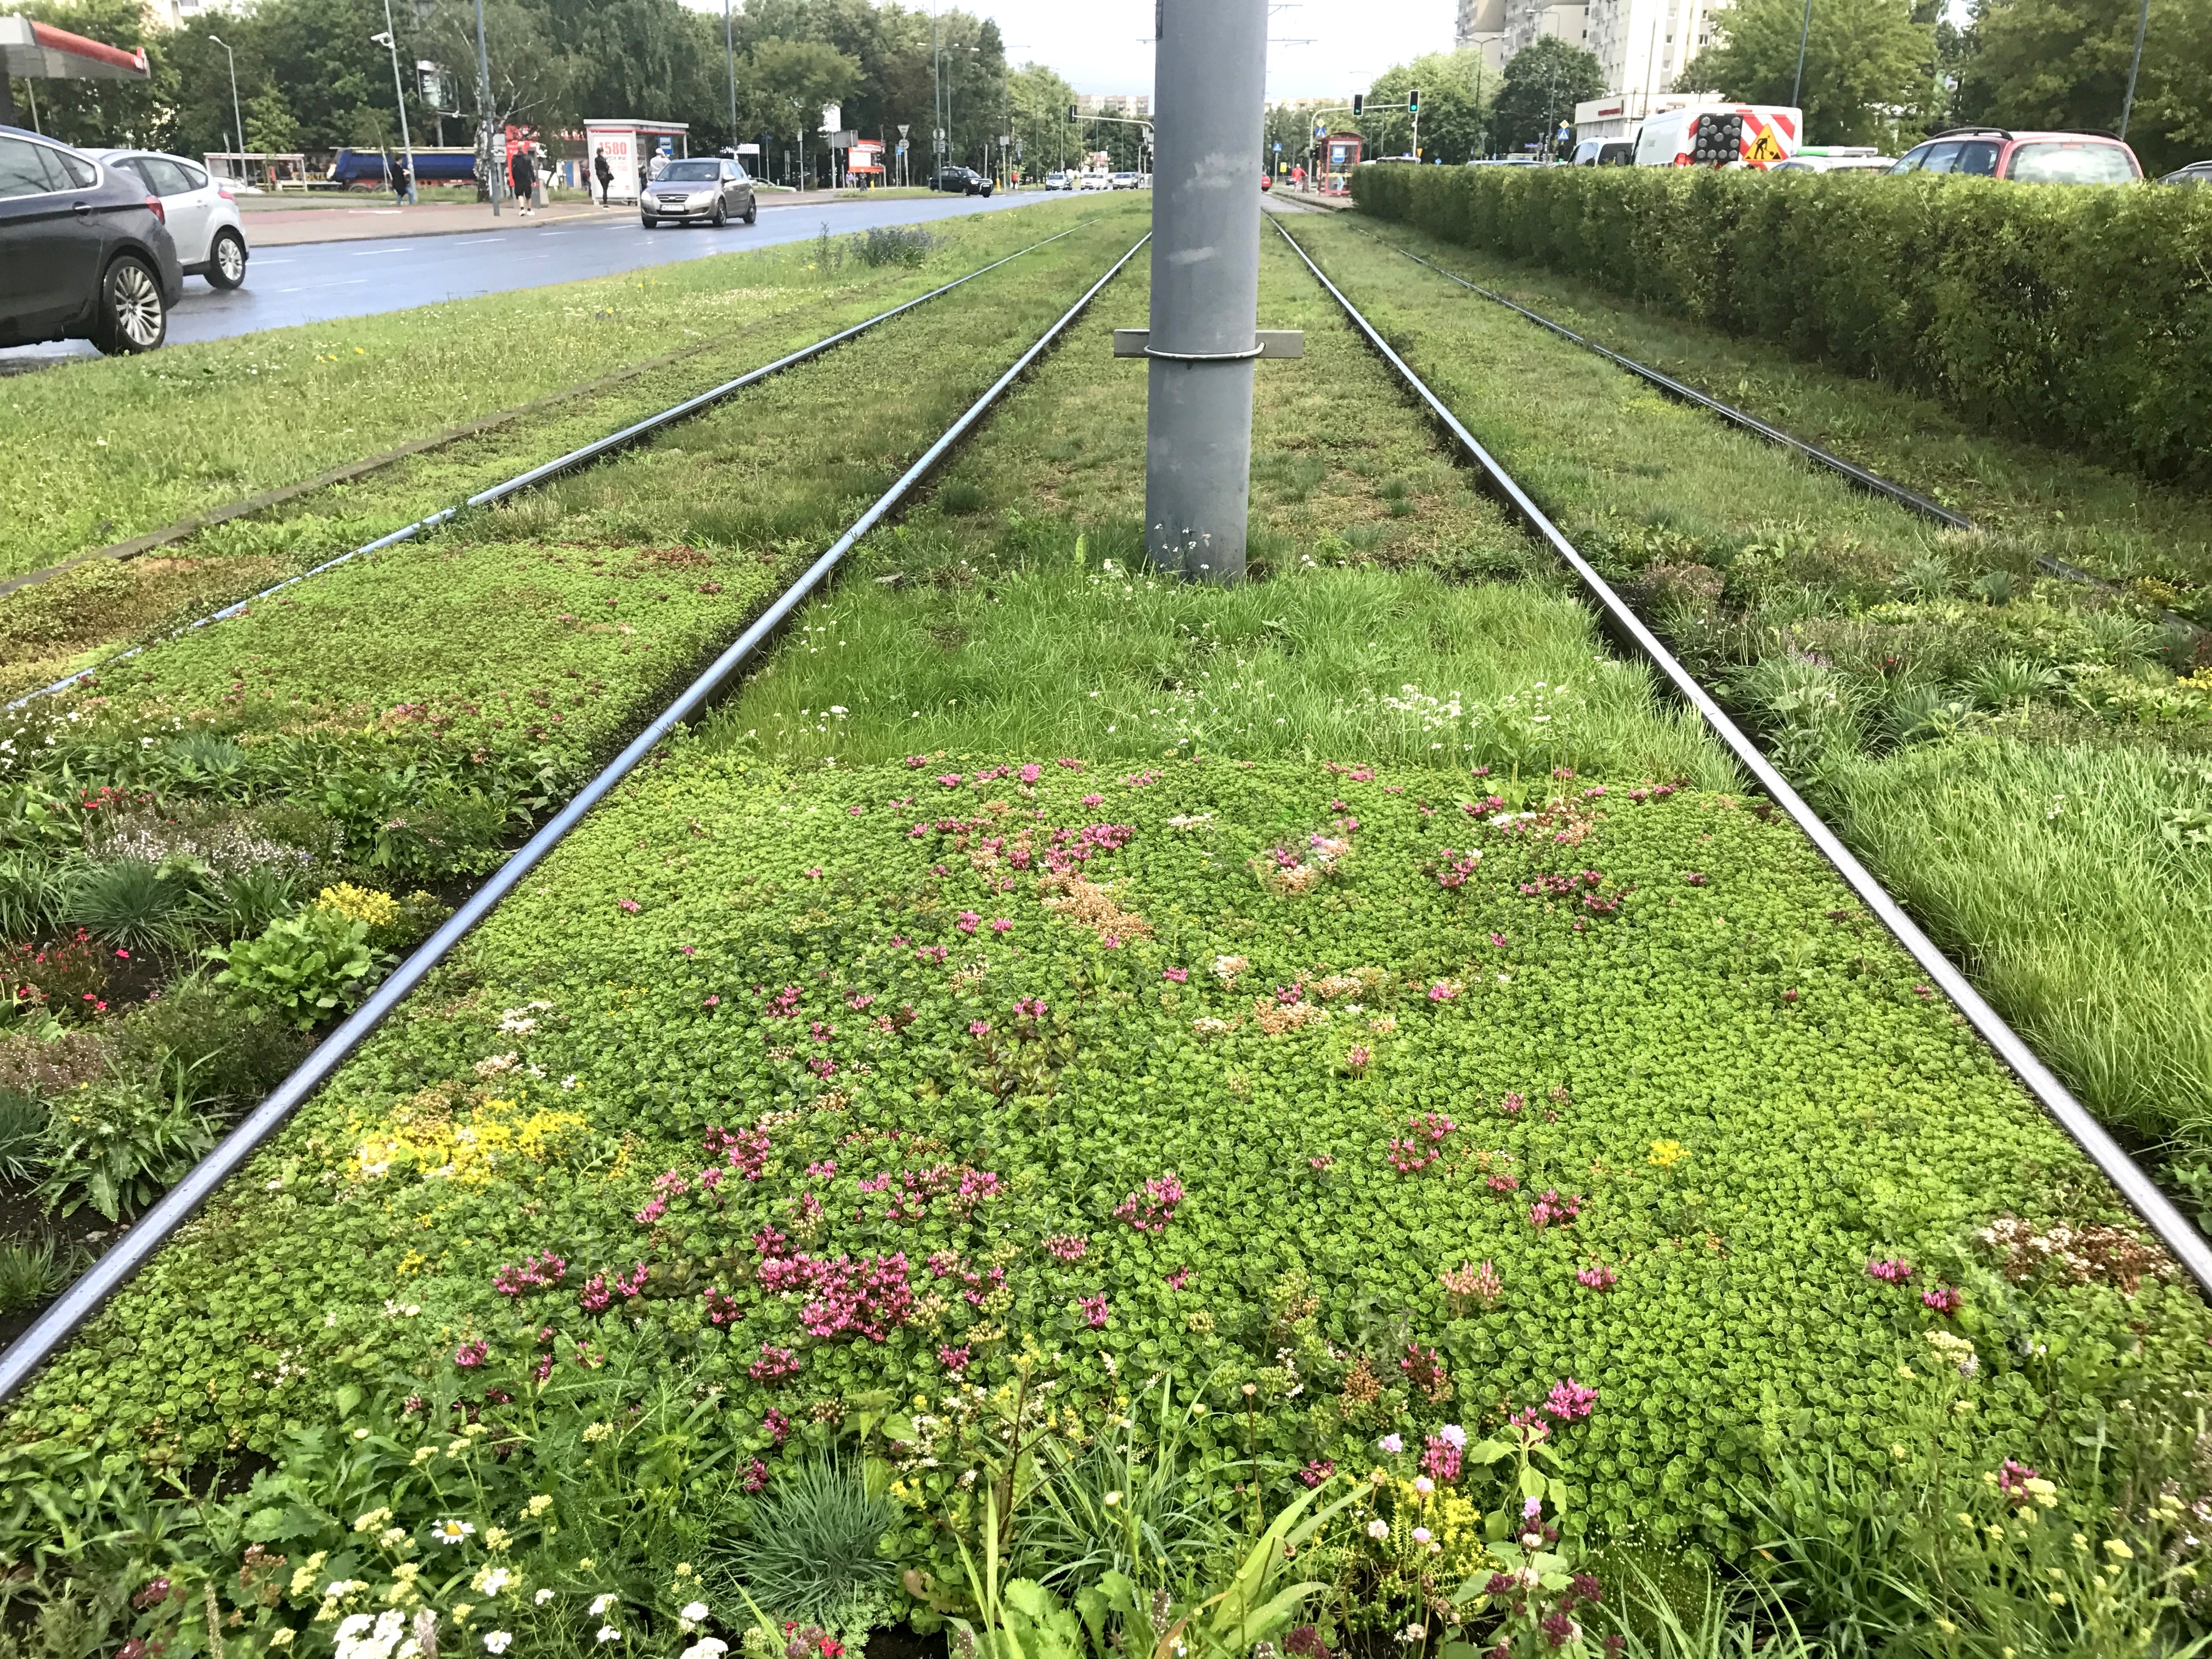 Testing different ground covers for tramway tracks in Warsaw